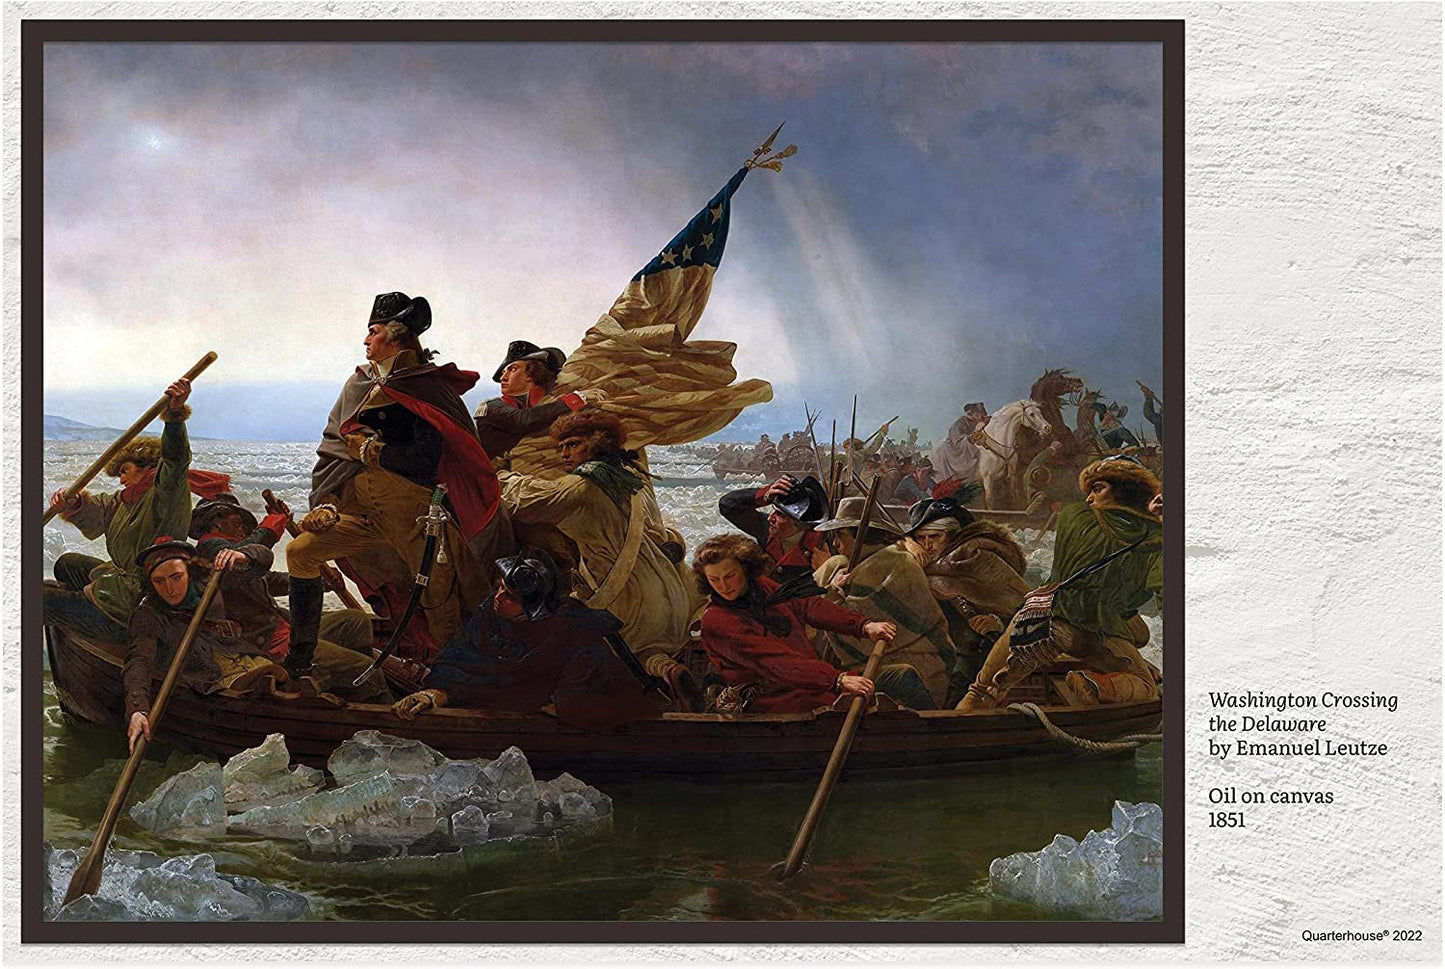 Quarterhouse American War Paintings Poster Set, Social Studies Classroom Learning Materials for K-12 Students and Teachers, Set of 10, 12 x 18 Inches, Extra Durable